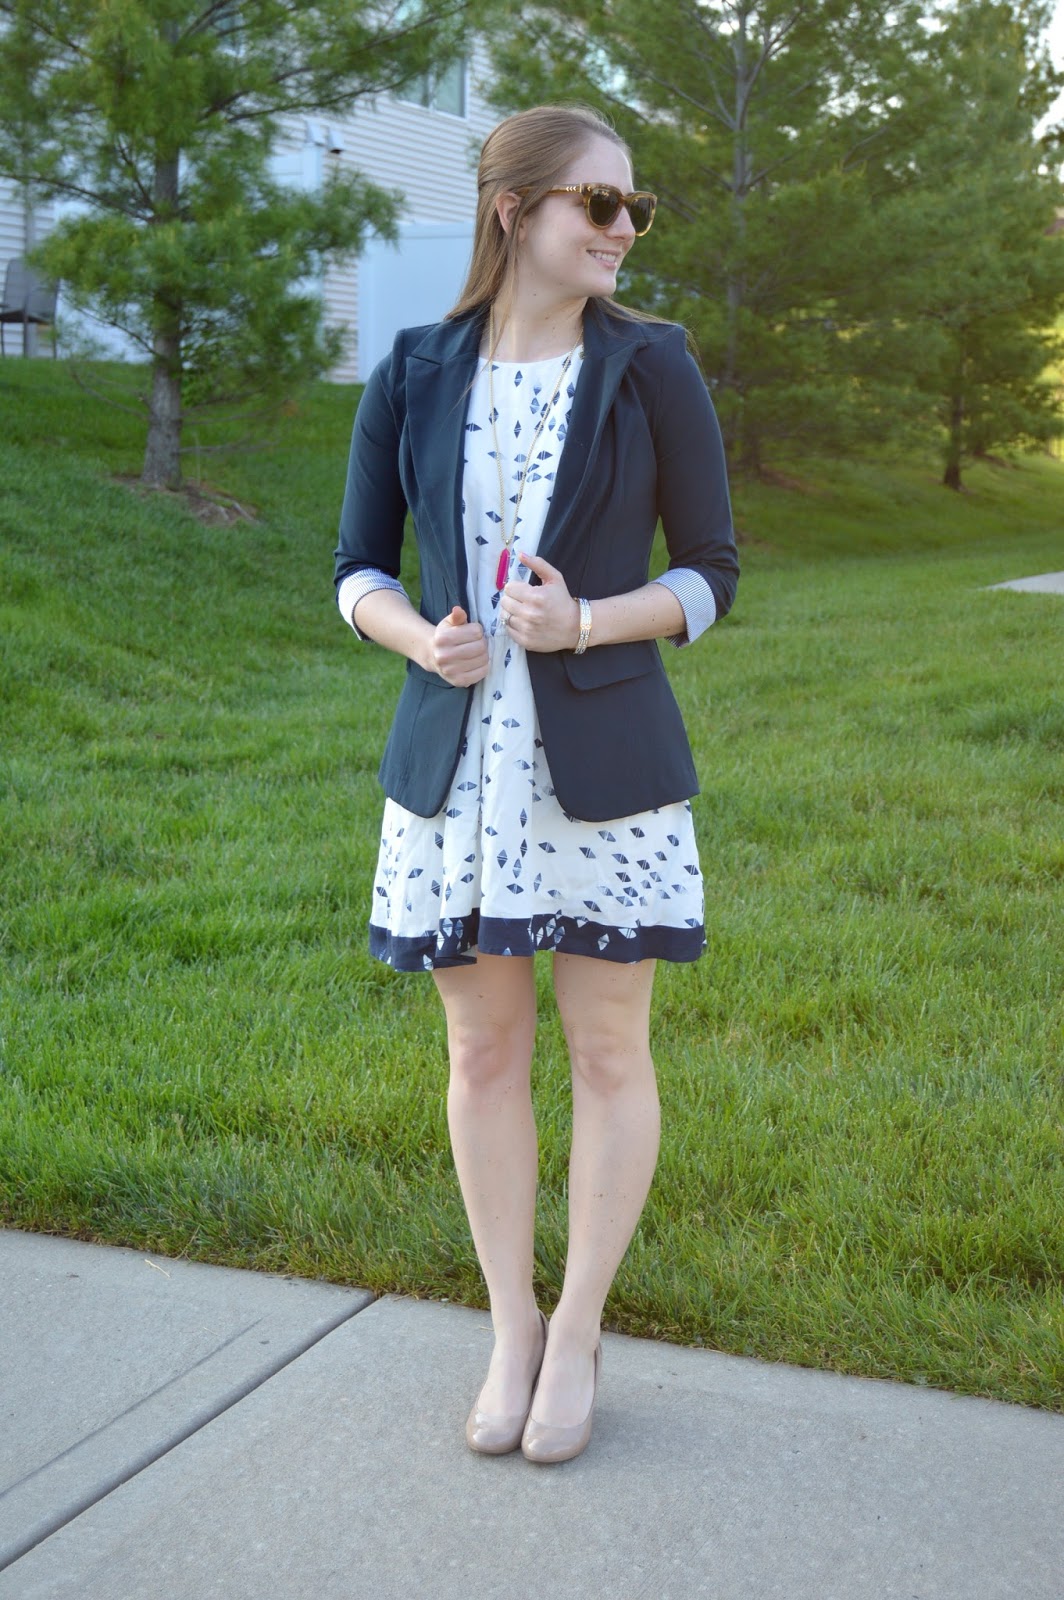 can you wear a romper to work | how to wear a romper to work | summer work outfit ideas | cute outfit ideas for work during the summer | summer outfit ideas | how to style a navy blazer | navy blazer outfit ideas